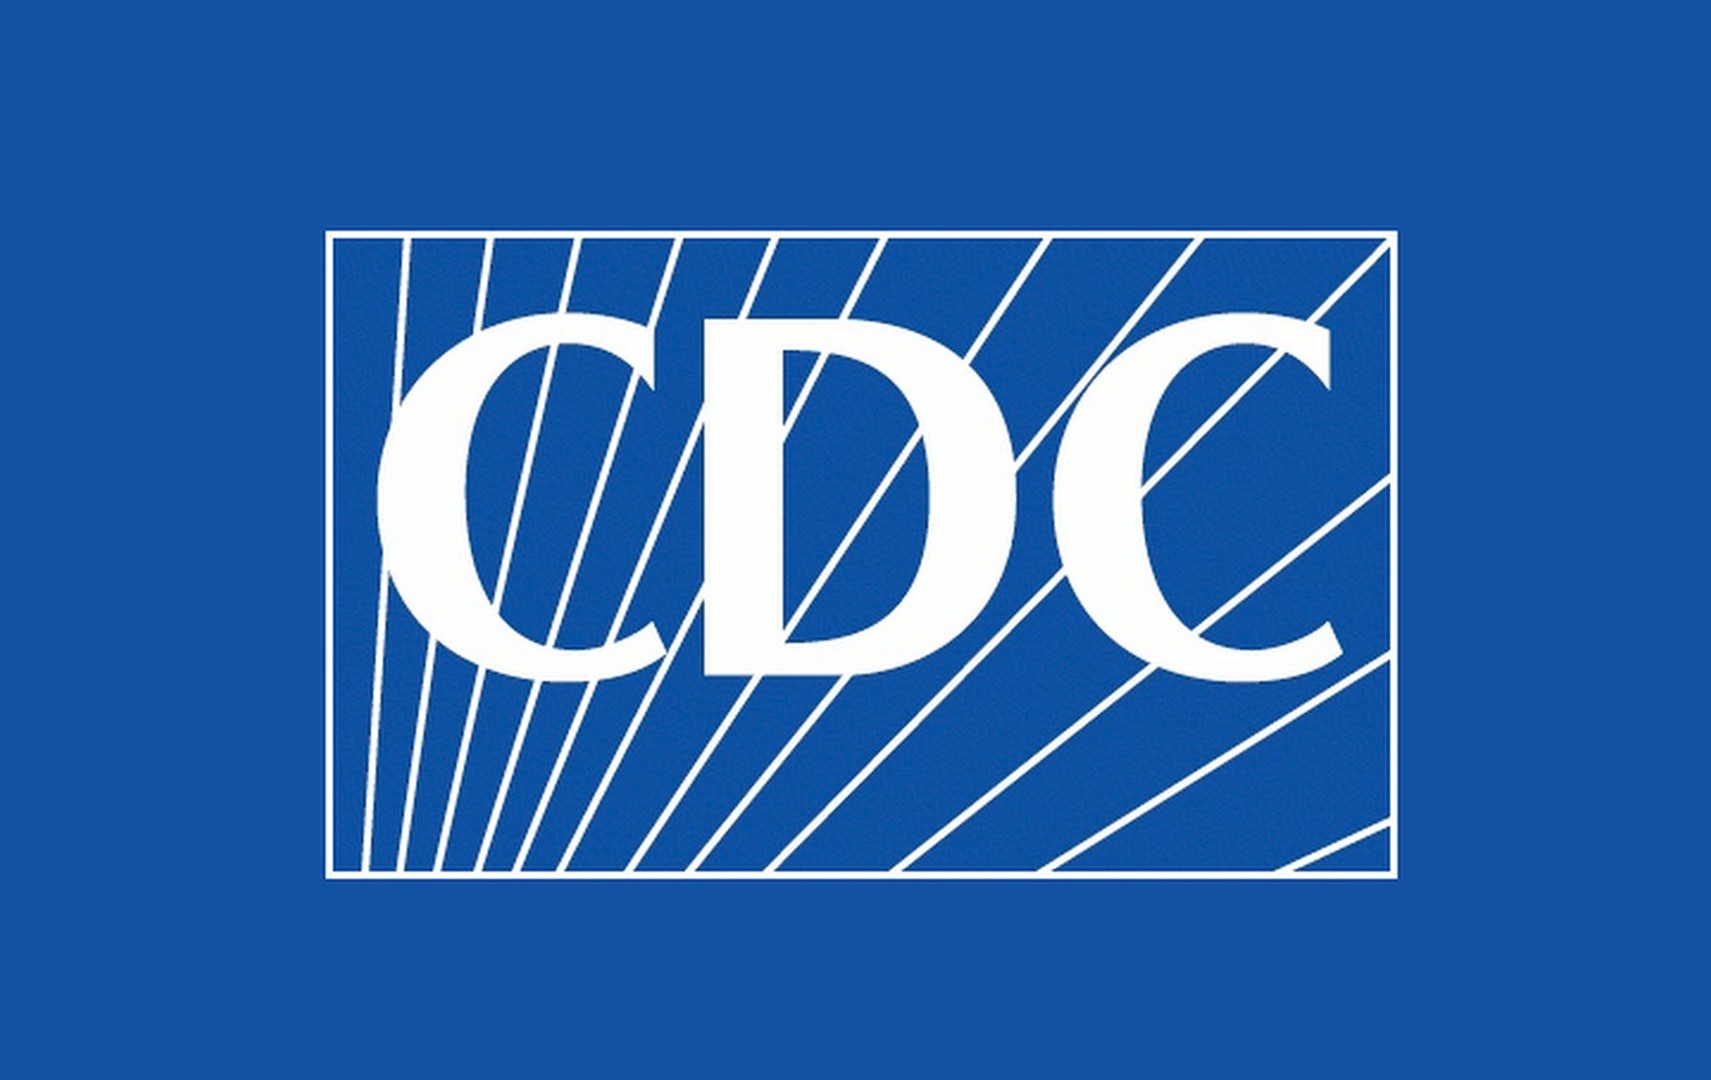 Center for Disease Control and Prevention logo.